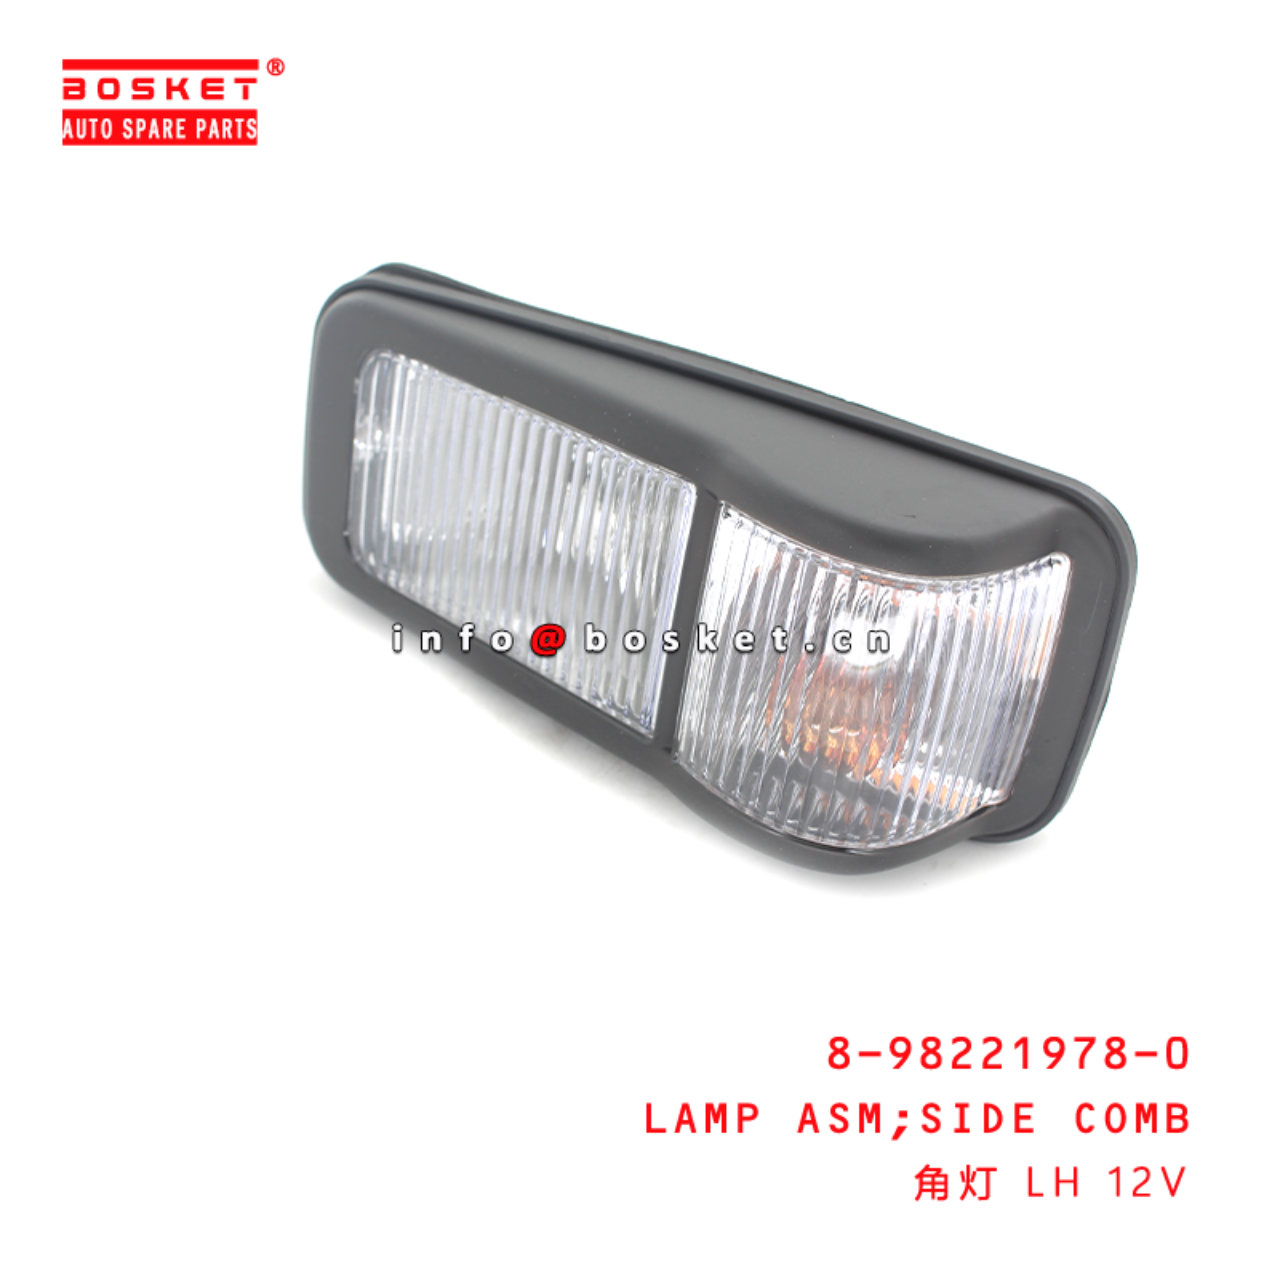 8-98221978-0 Side Combination Lamp Assembly Suitable for ISUZU NLR 8982219780